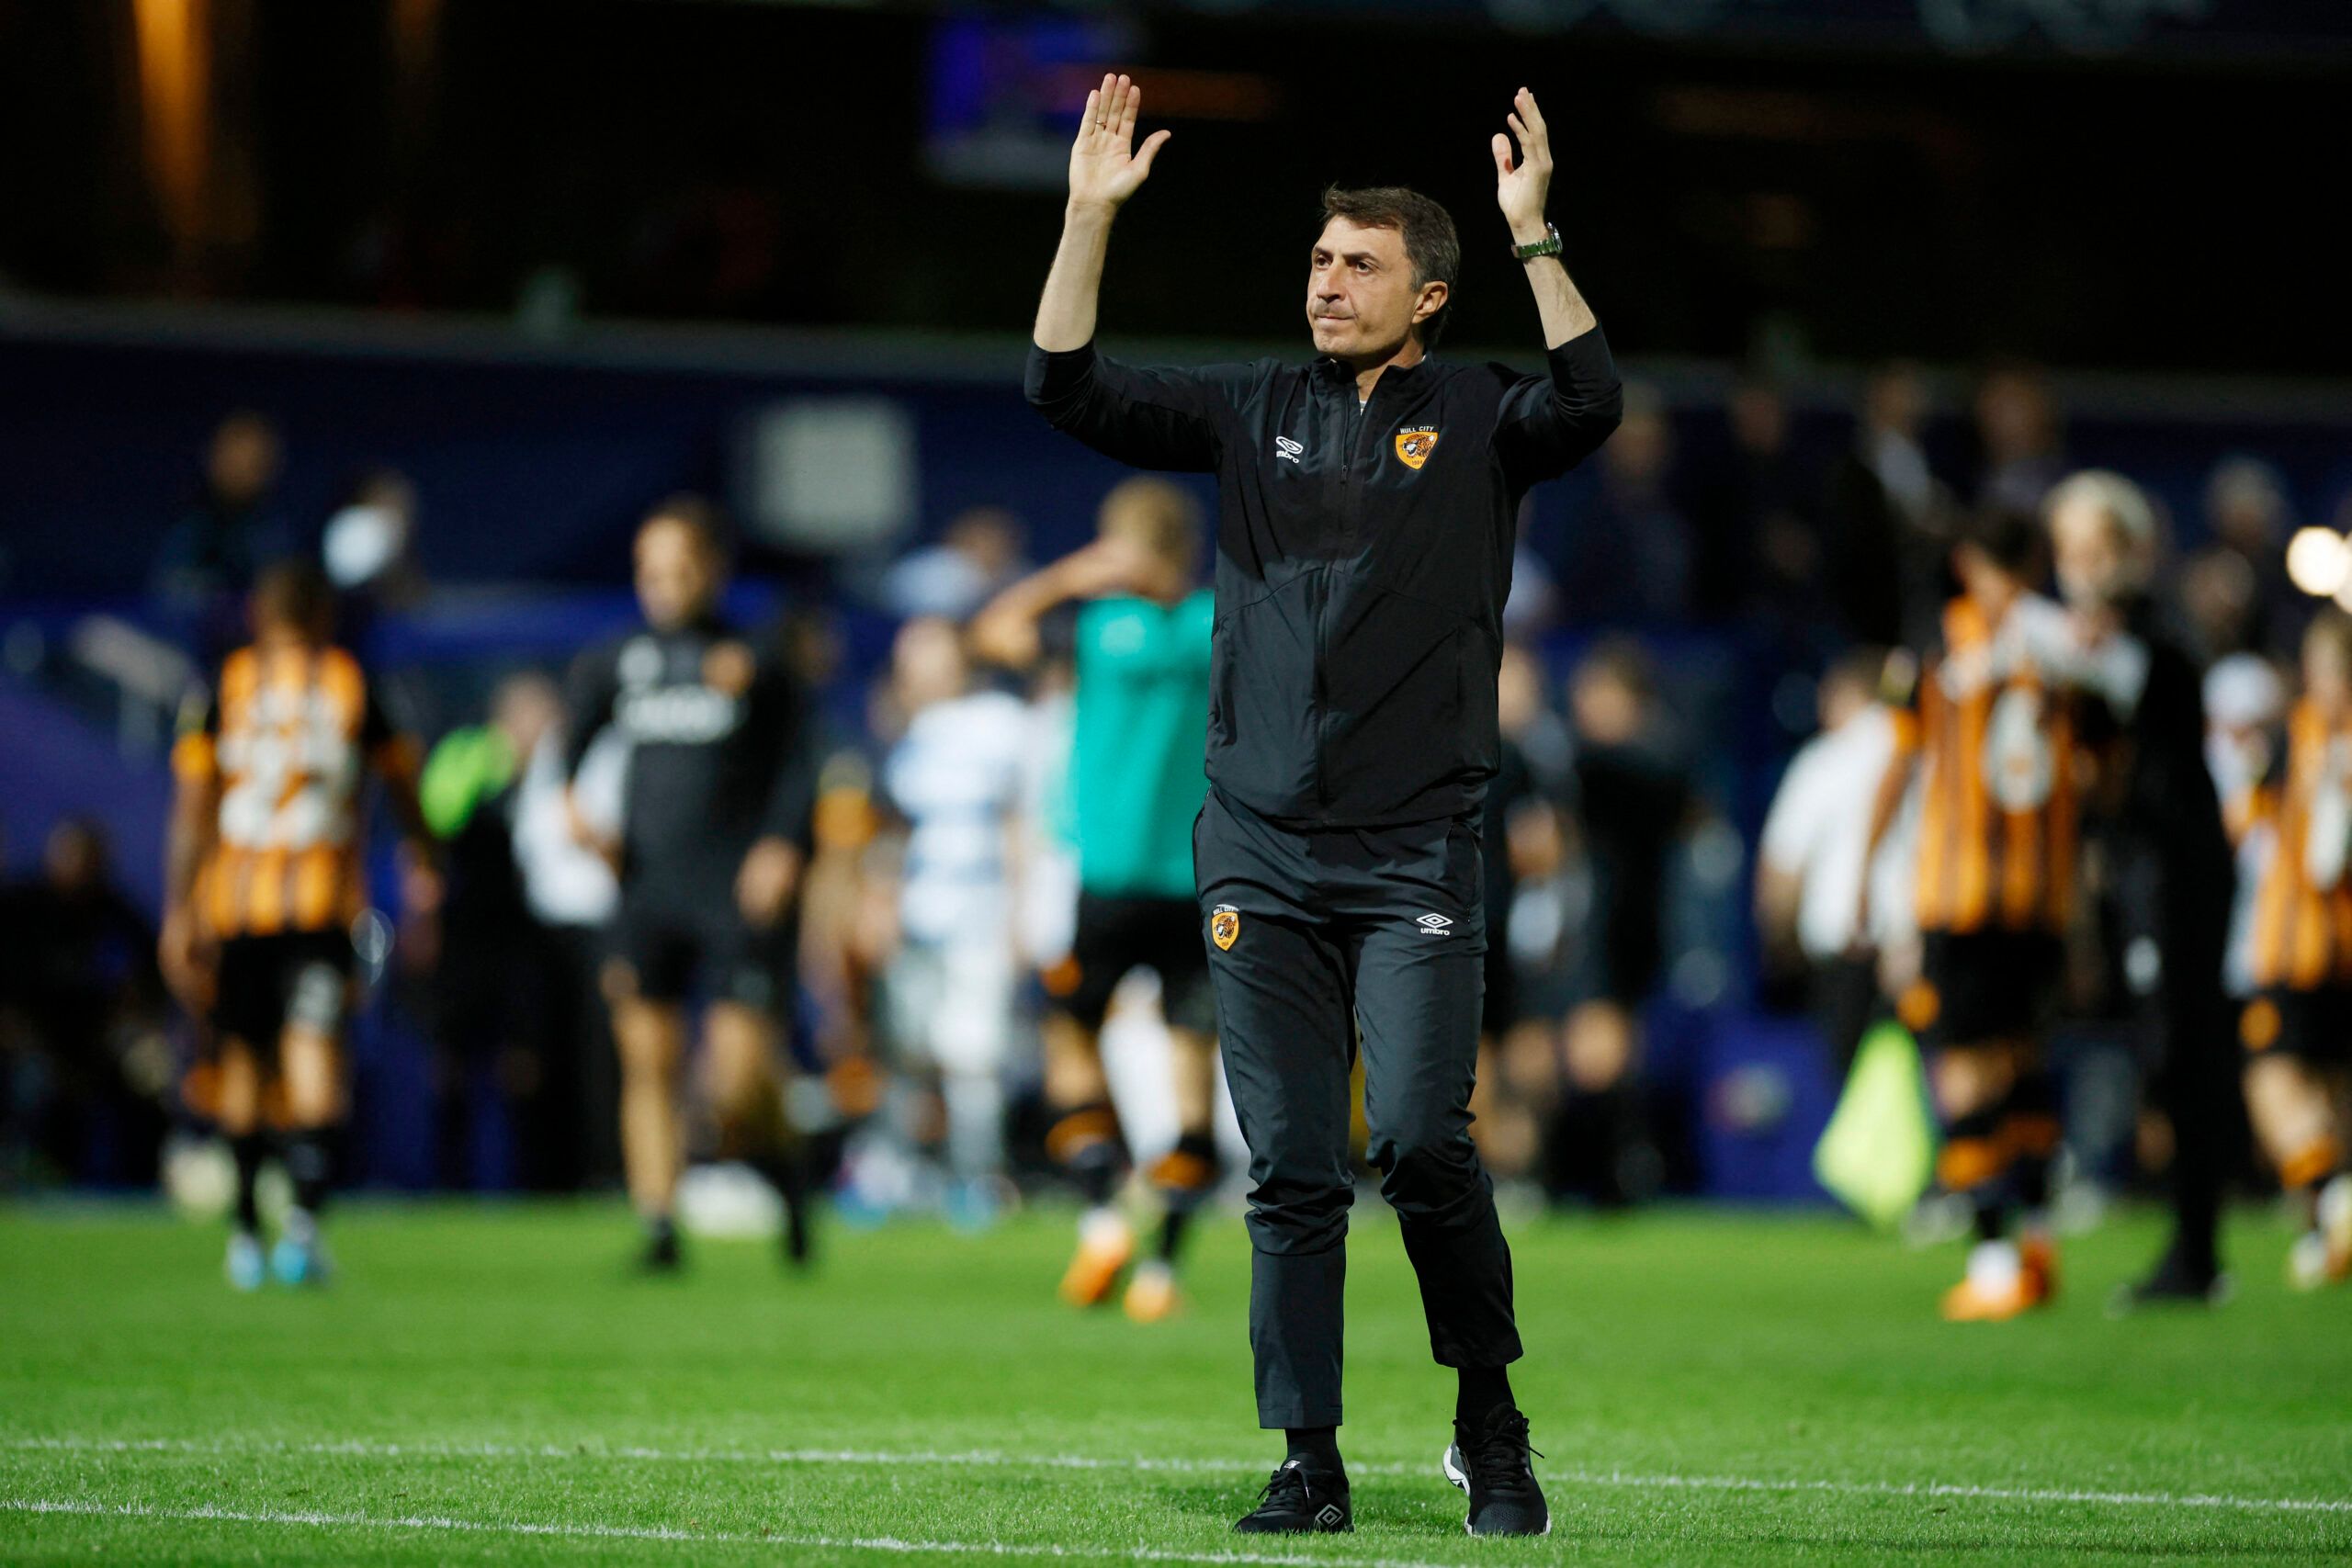 Soccer Football - Championship - Queens Park Rangers v Hull City - Loftus Road, London, Britain - August 30, 2022  Hull City manager Shota Arveladze acknowledges fans after the match Action Images/John Sibley EDITORIAL USE ONLY. No use with unauthorized audio, video, data, fixture lists, club/league logos or 'live' services. Online in-match use limited to 75 images, no video emulation. No use in betting, games or single club /league/player publications.  Please contact your account representativ